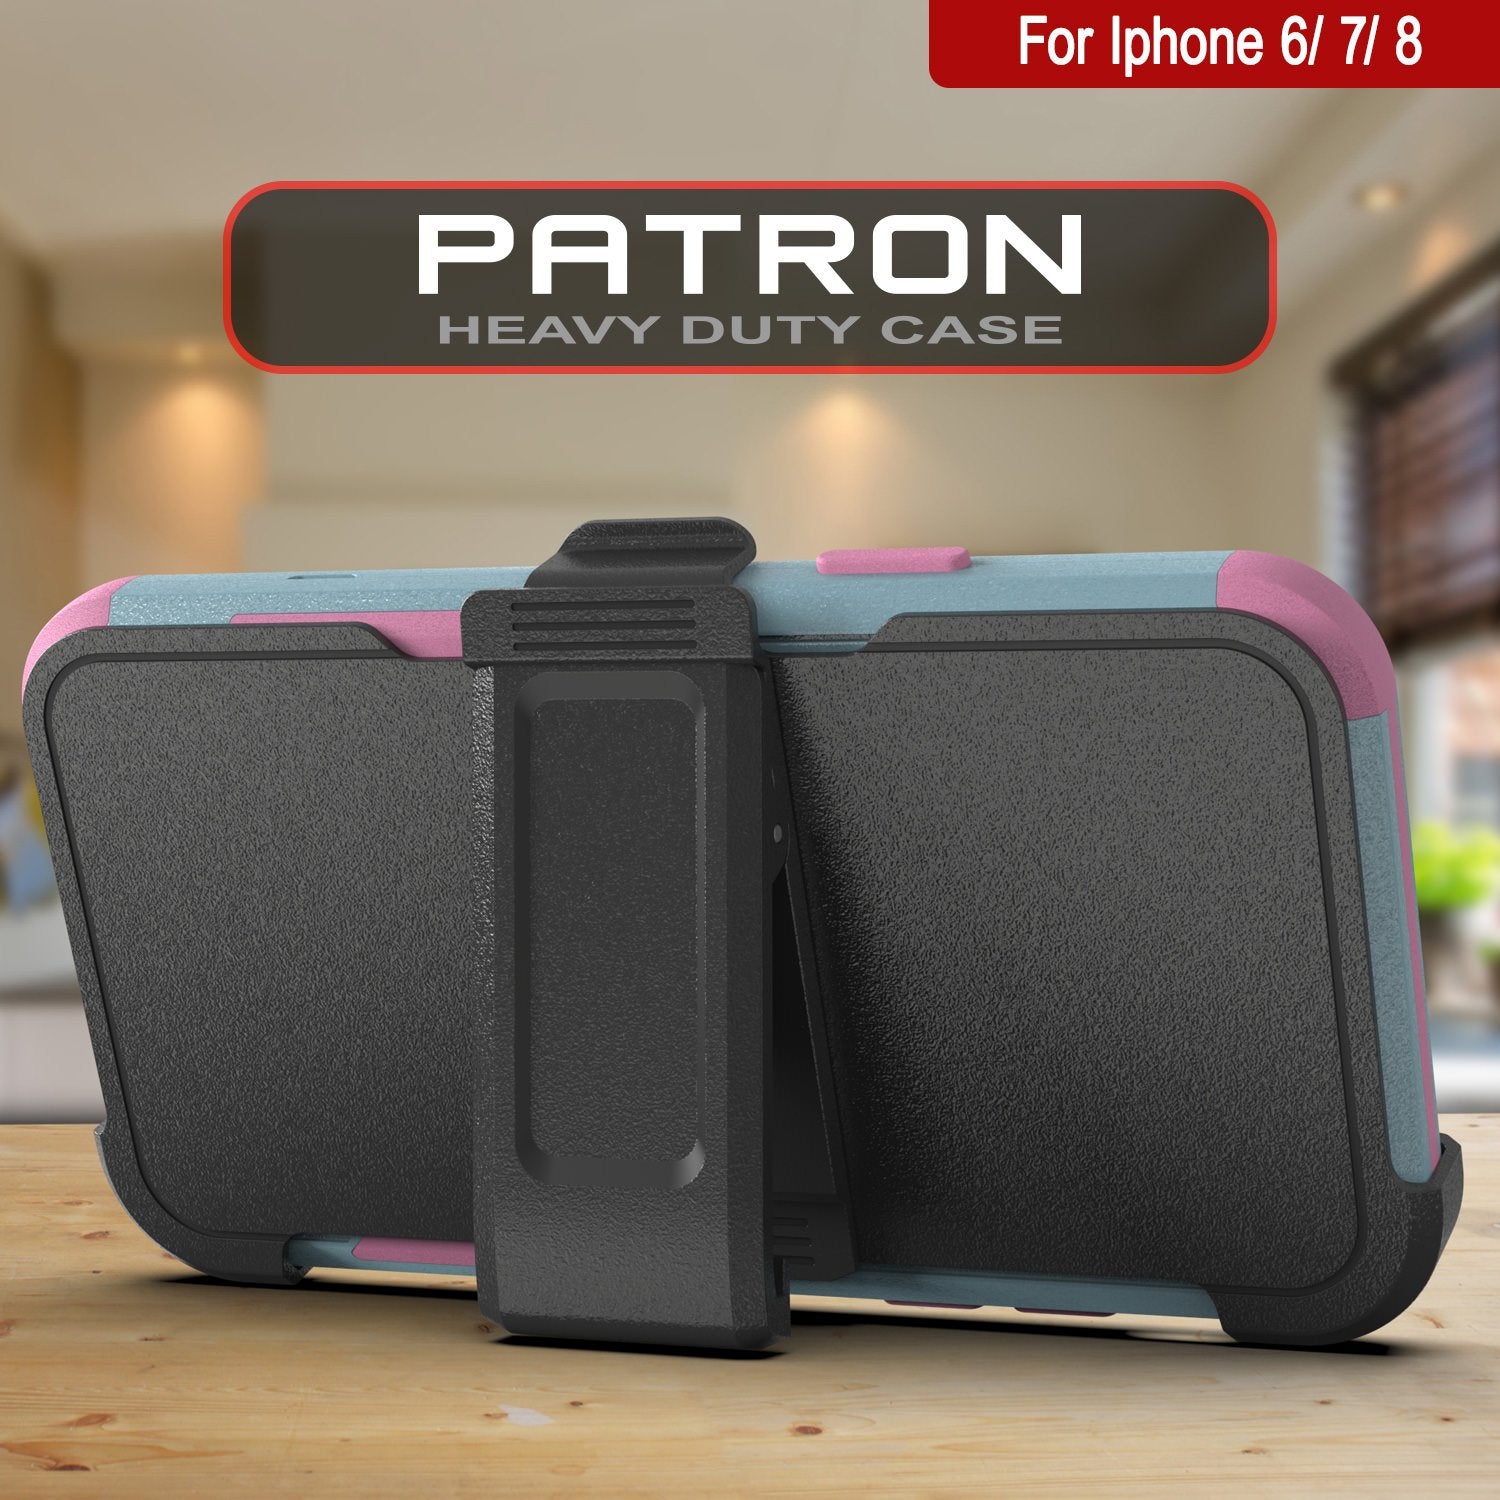 Punkcase for iPhone 7 Belt Clip Multilayer Holster Case [Patron Series] [Mint-Pink]